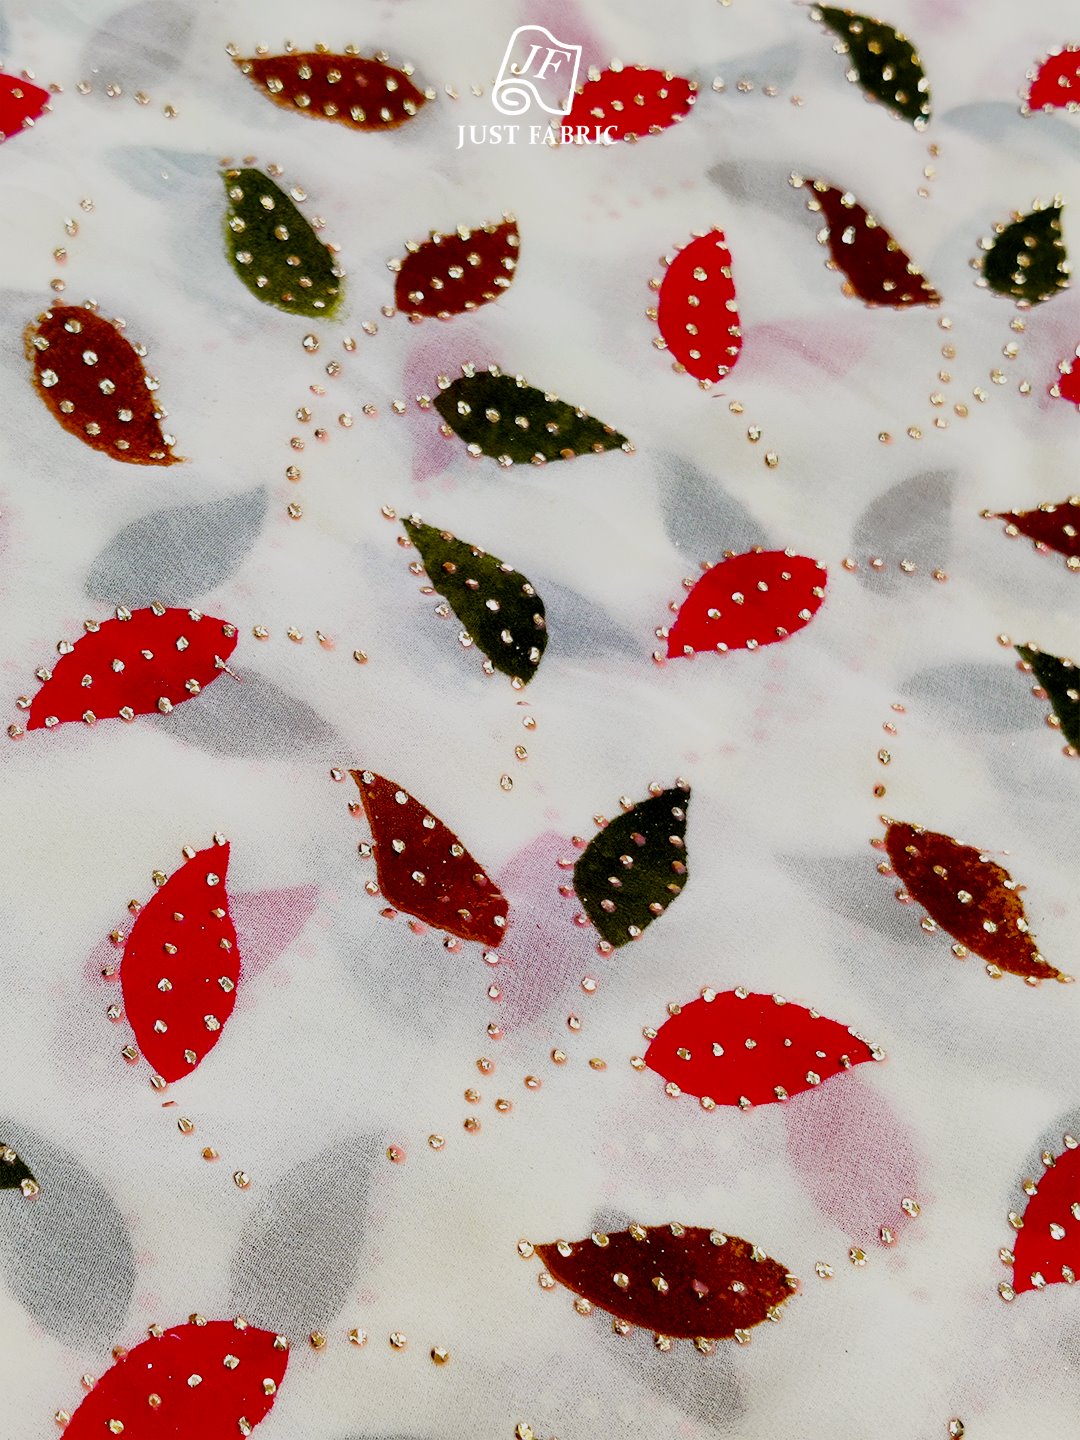 Mukaish work on Leaf print All over on white Georgette Fabric With Embroidery and Print (44" Inch Width) JUST FABRIC